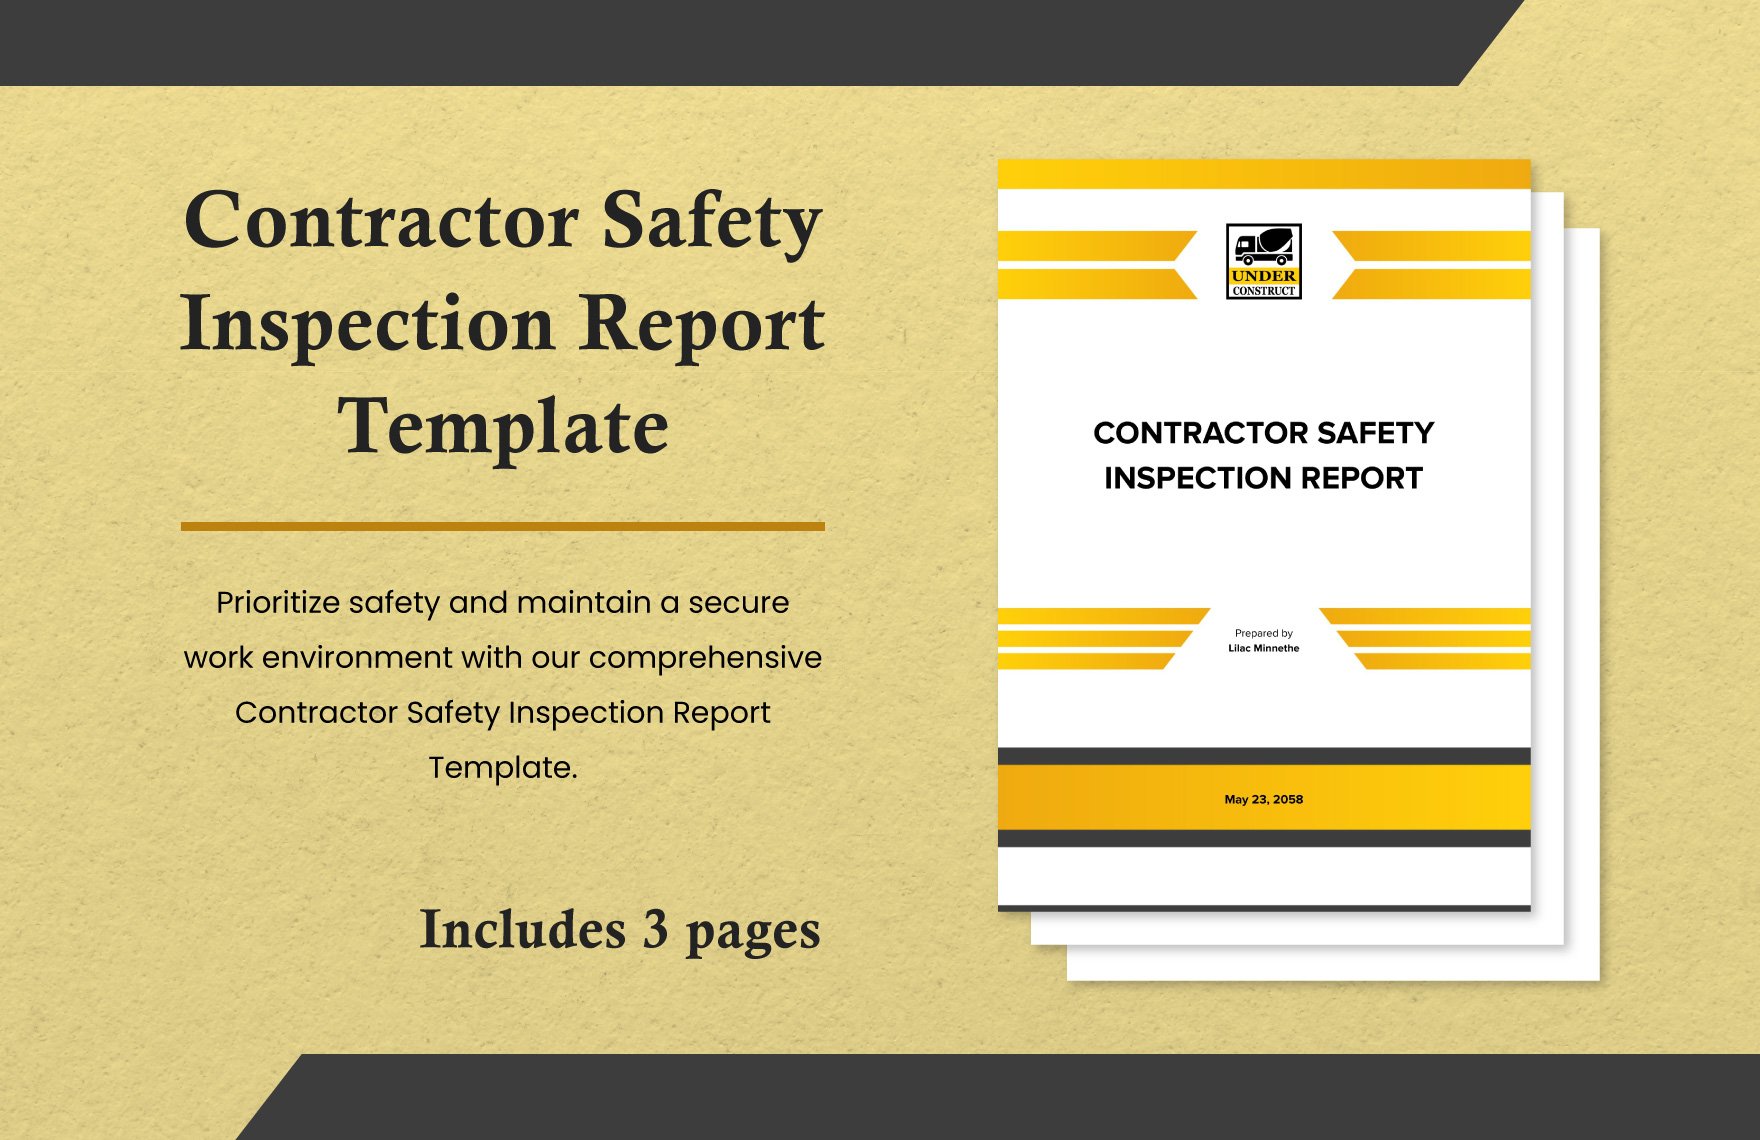 Contractor Safety Inspection Report Template